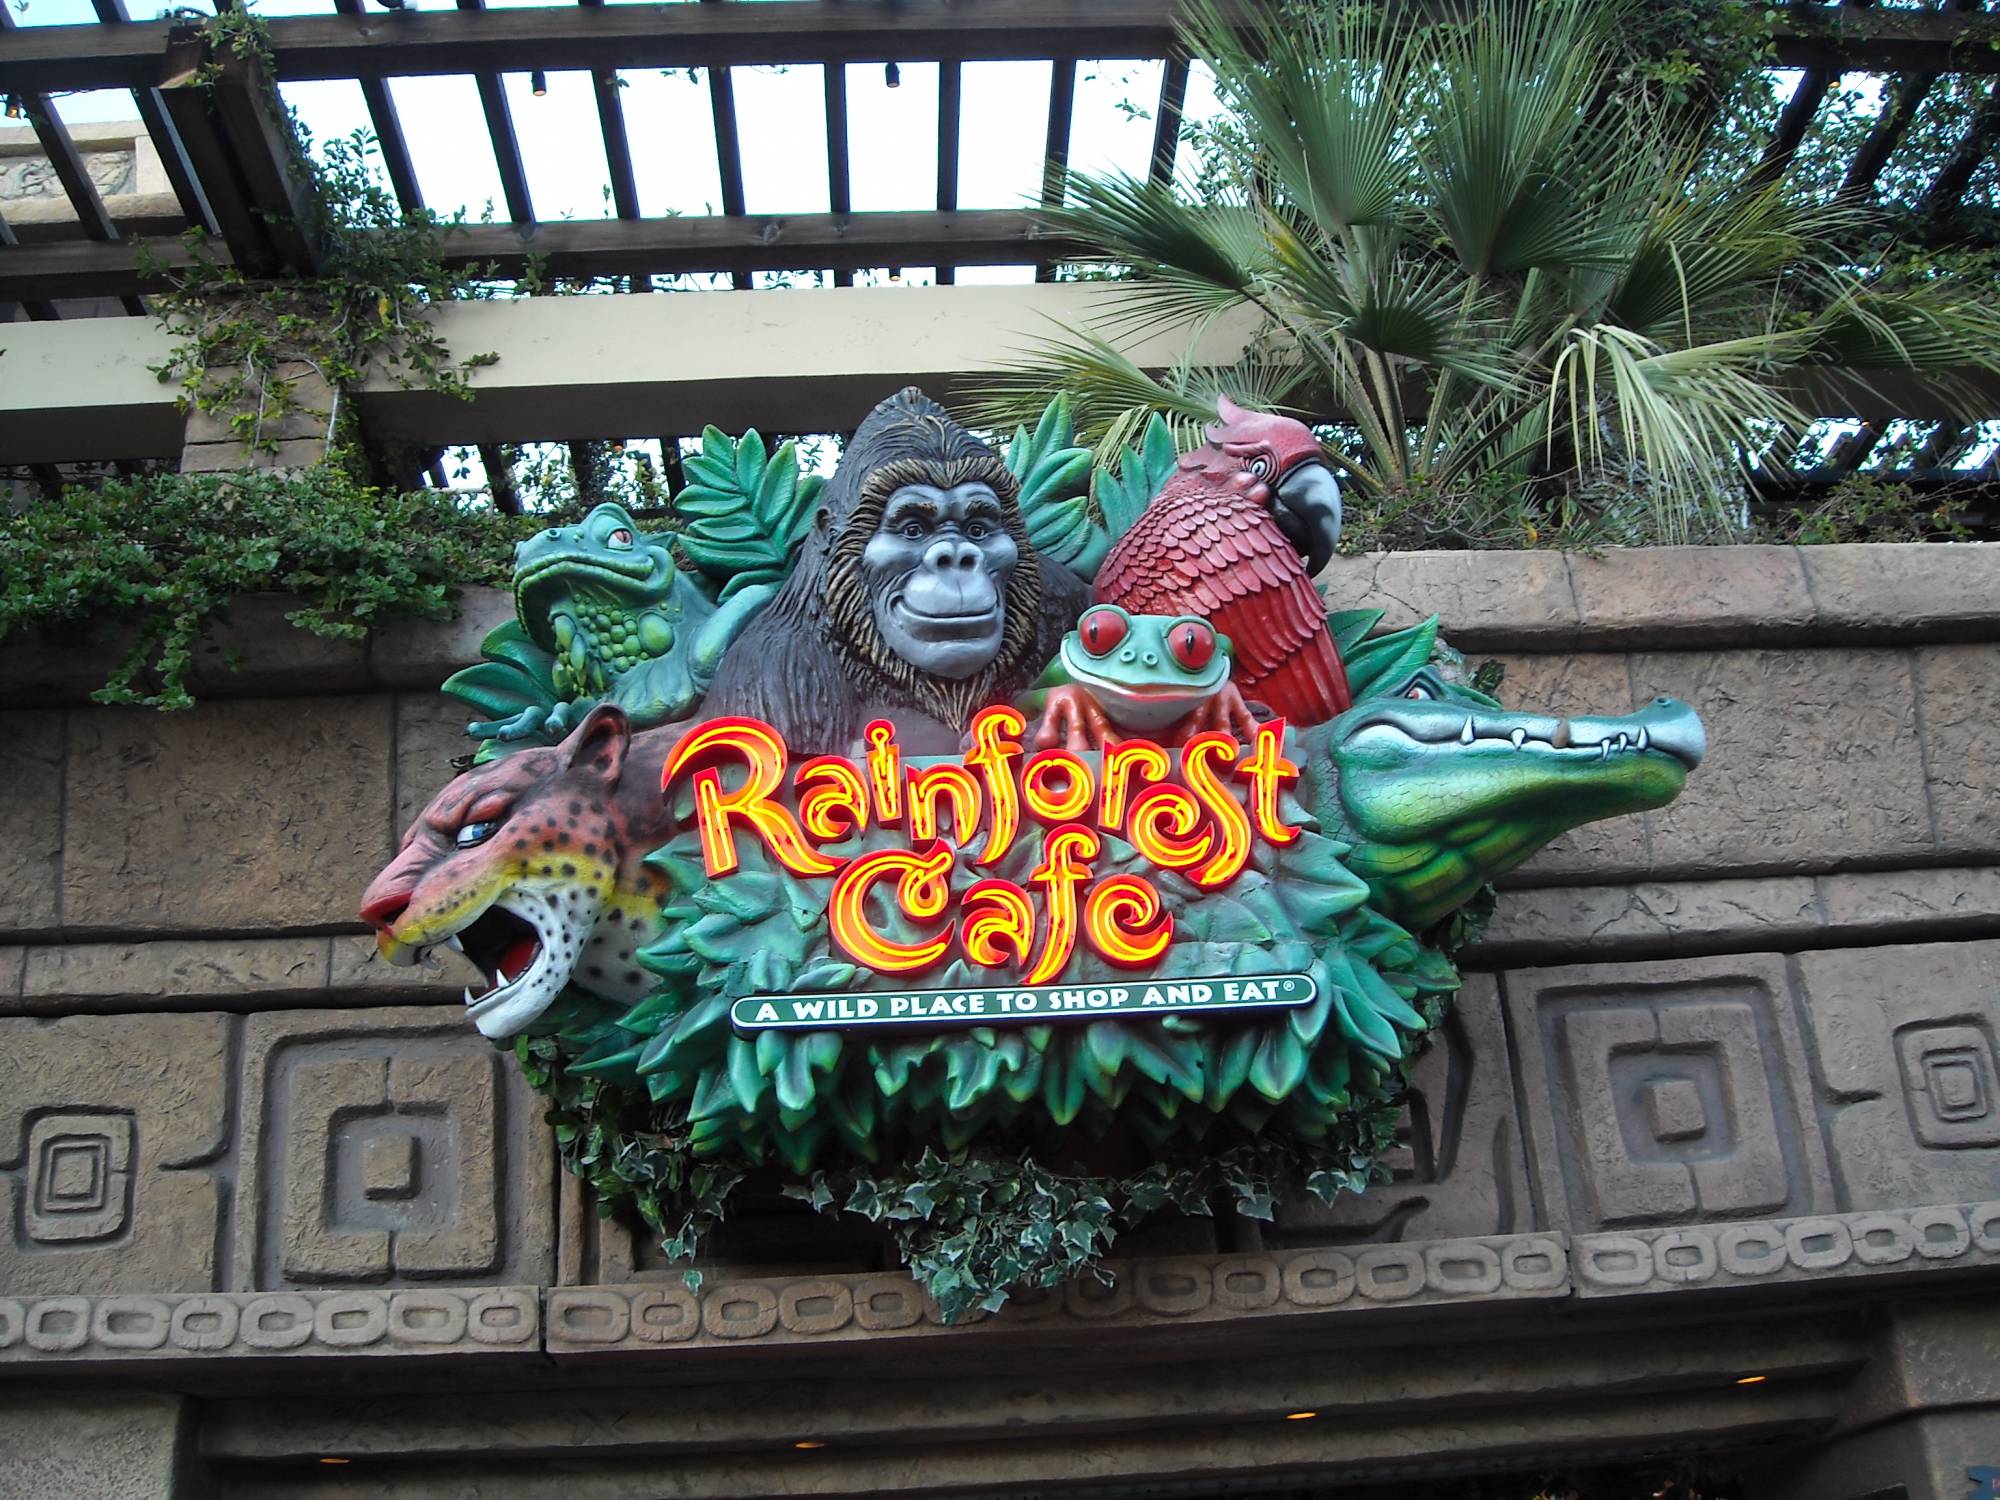 Explore the Rainforest Cafe at the Downtown Disney District in Disneyland |PassPorter.com